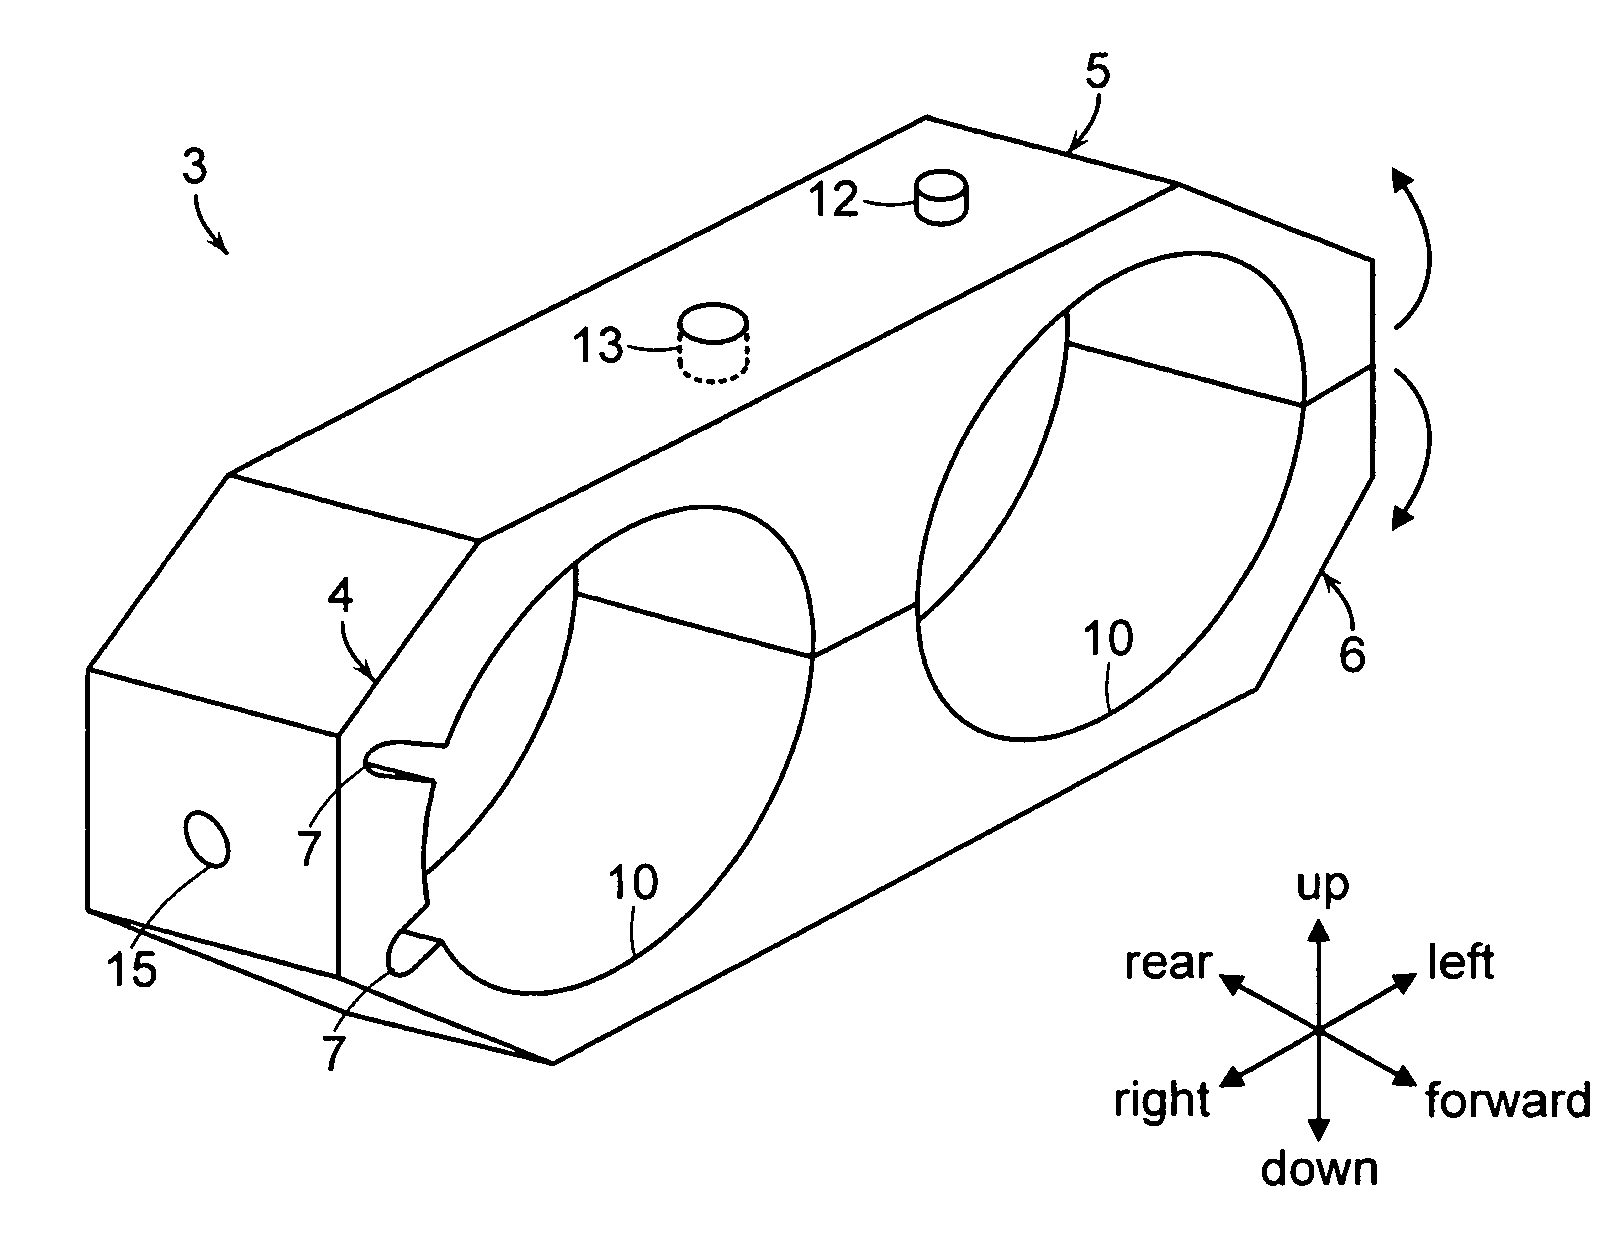 Support structure for battery modules